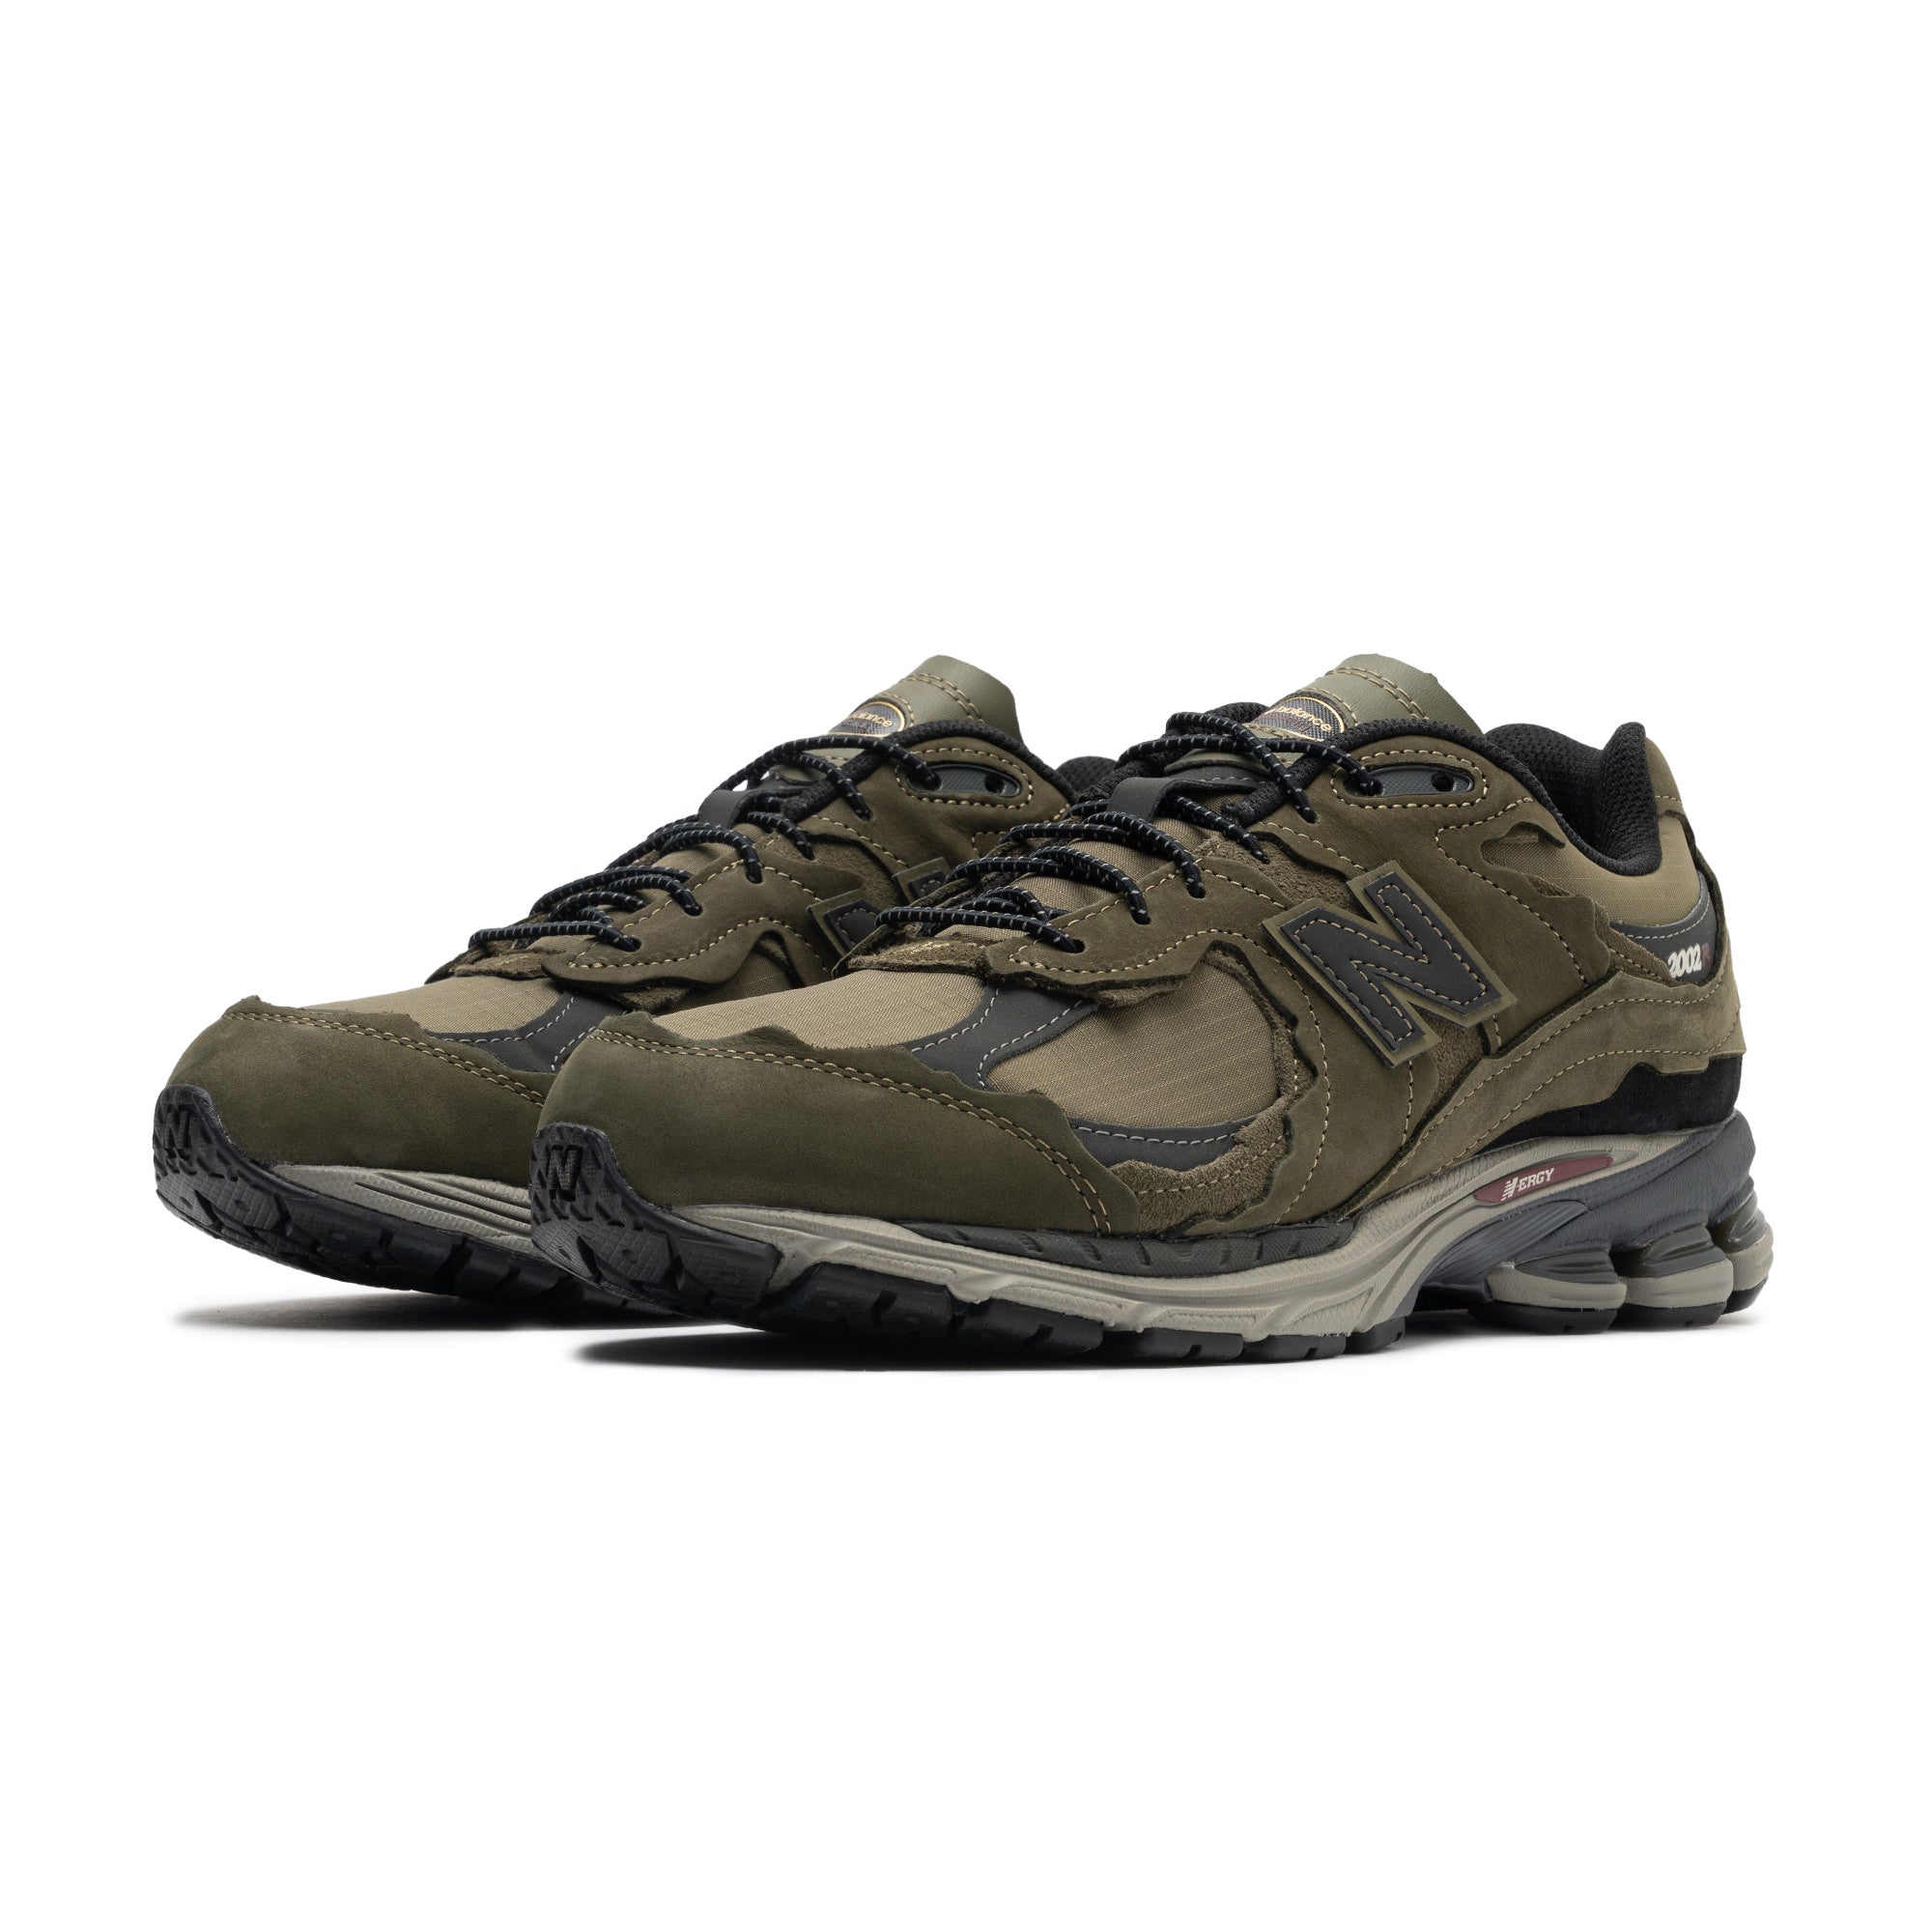 Army-Colored Olive Sneakers : medium olive 2